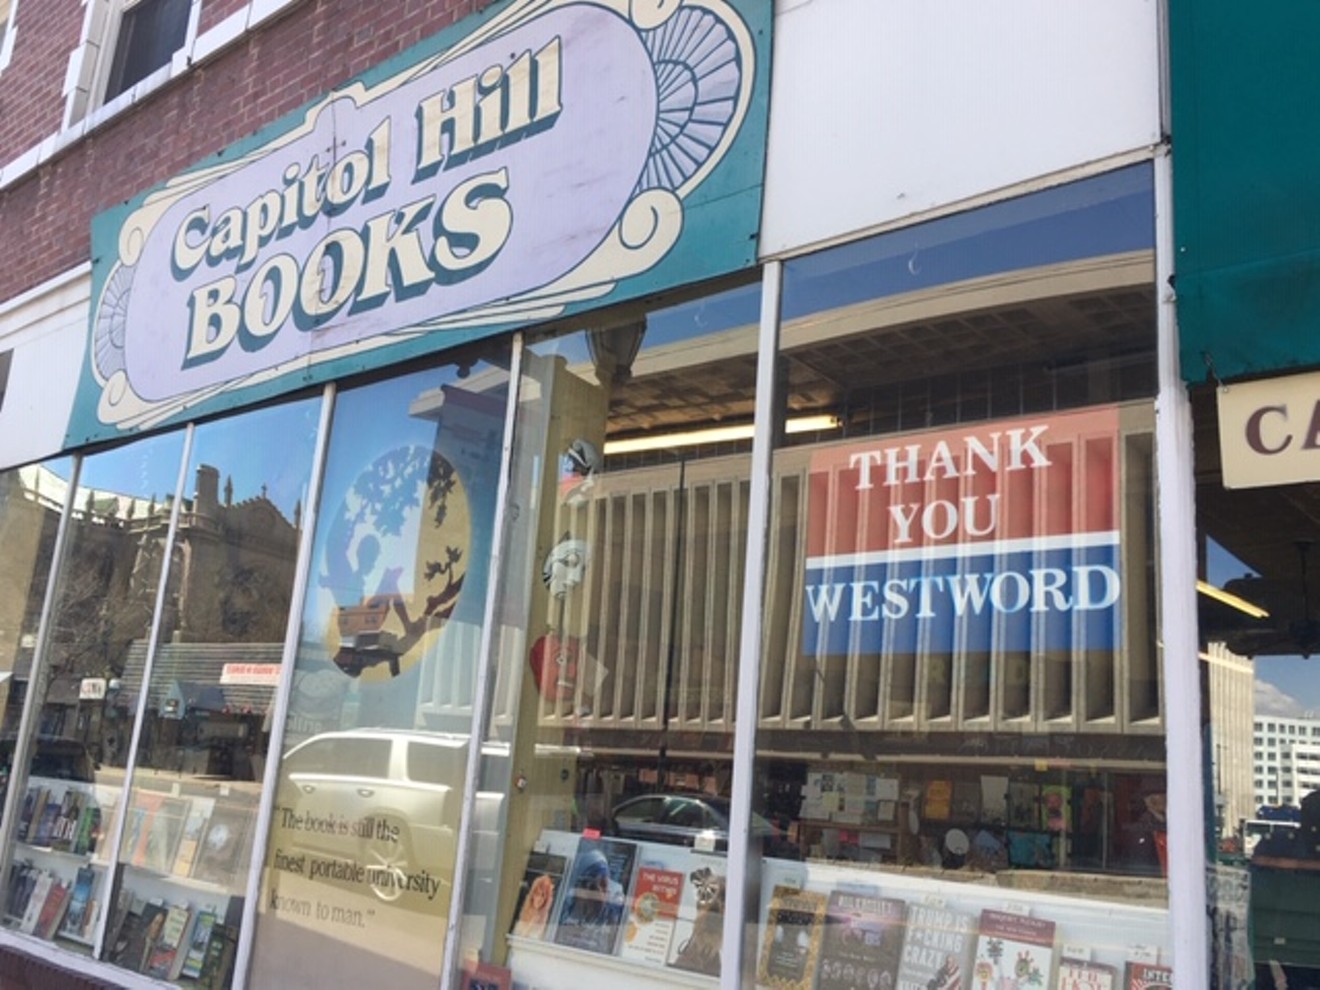 Westword readers saved Capitol Hill Books.